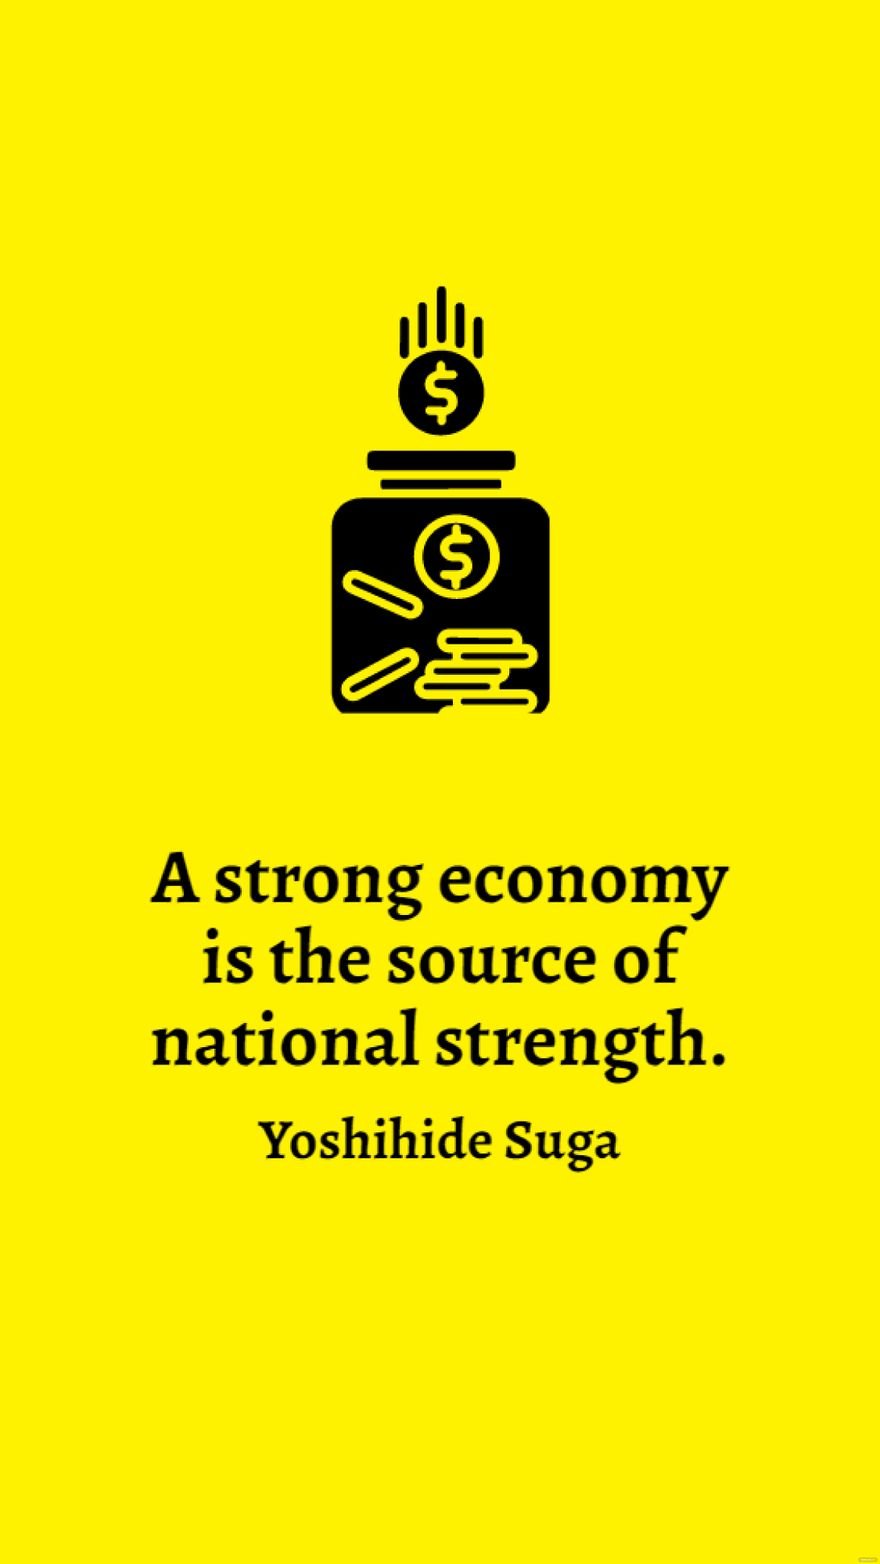 Free Yoshihide Suga - A strong economy is the source of national strength. in JPG